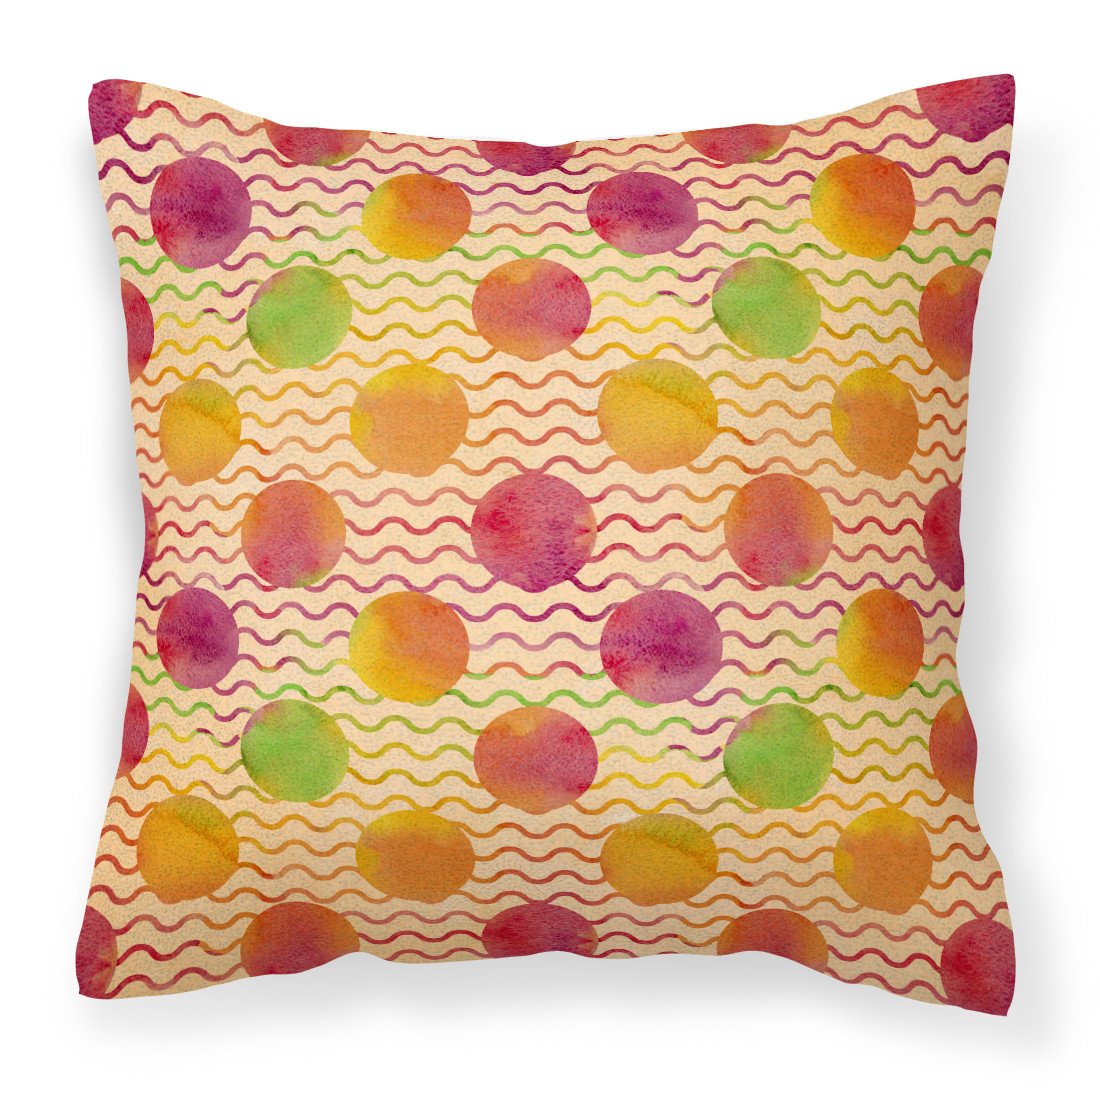 Watercolor Rainbow Dots and Sqiggles Fabric Decorative Pillow BB7514PW1818 by Caroline's Treasures